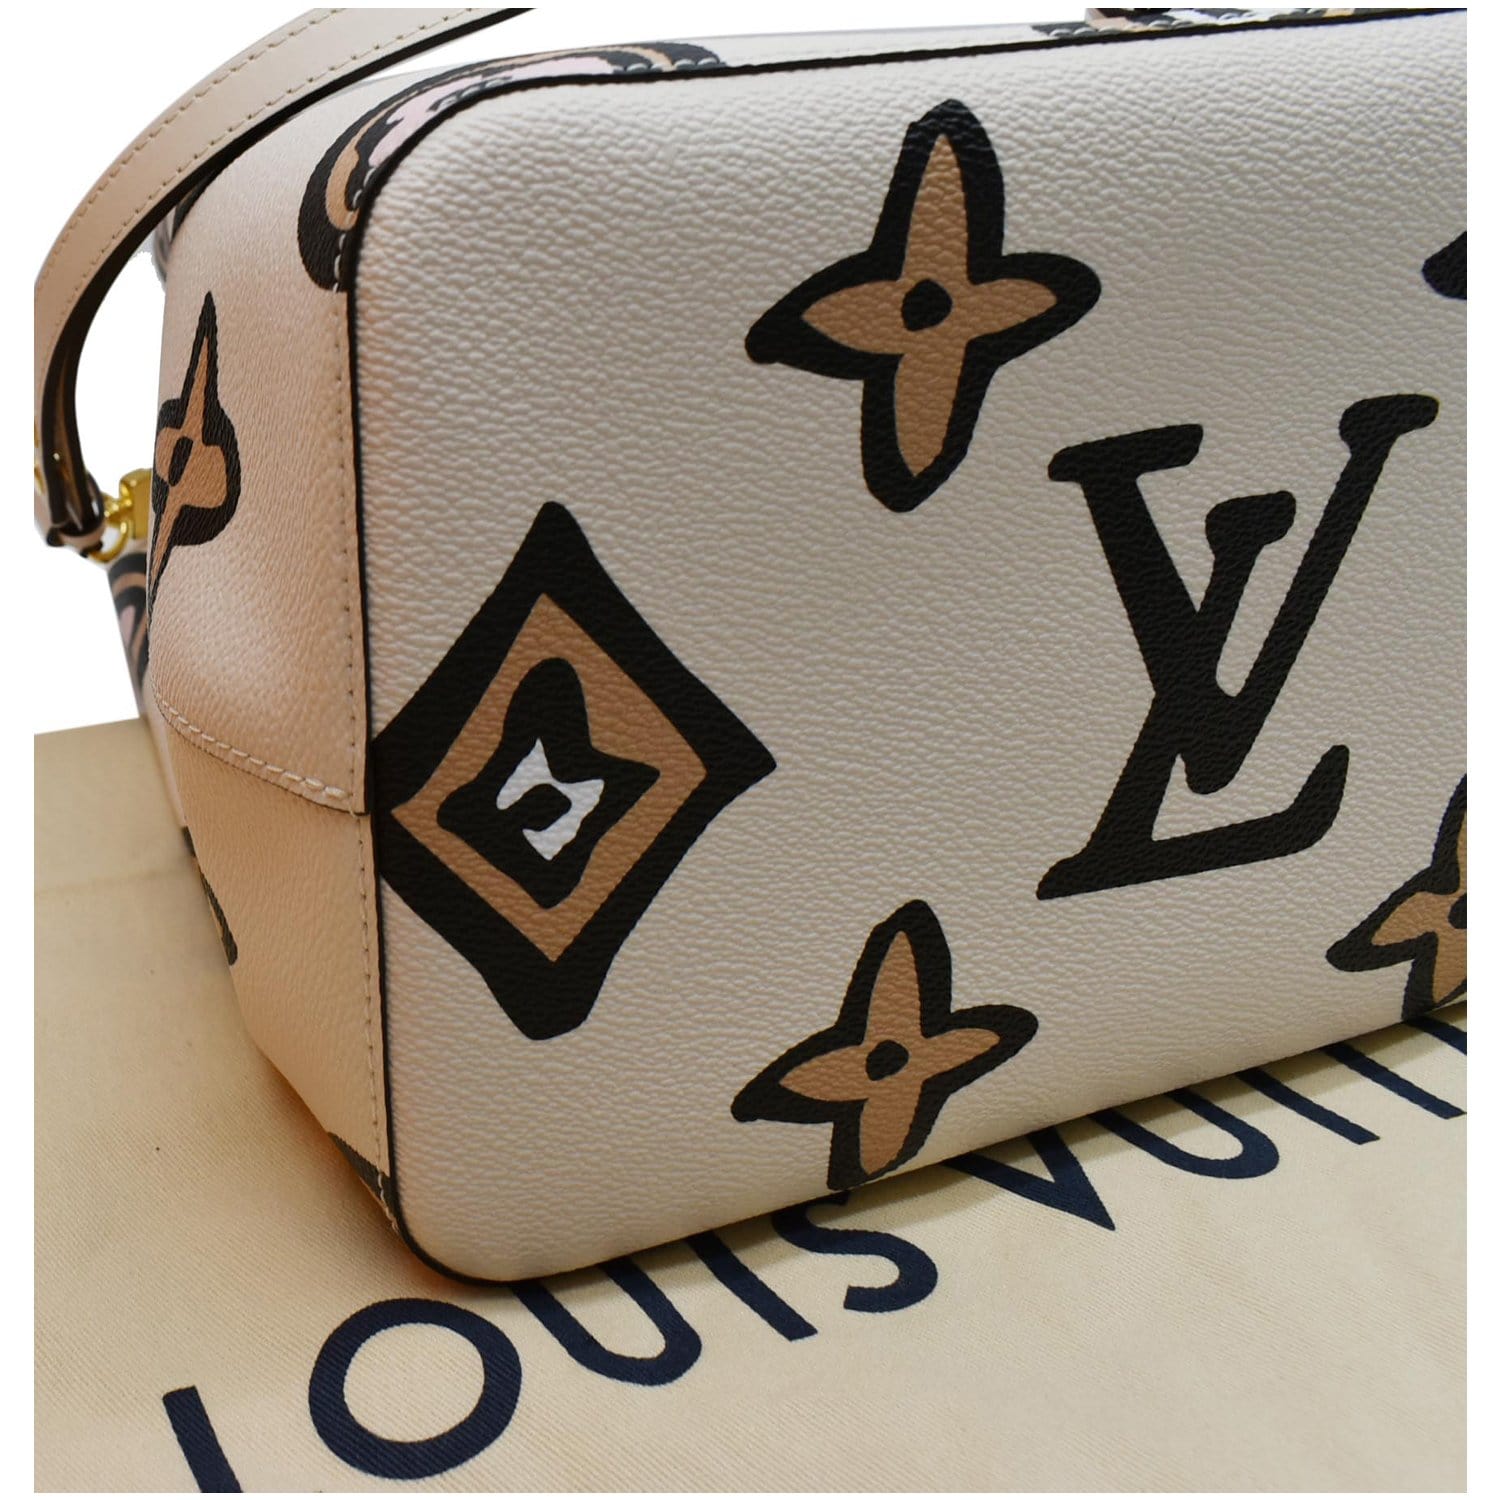 WILD AT HEART NEVERFULL CREME